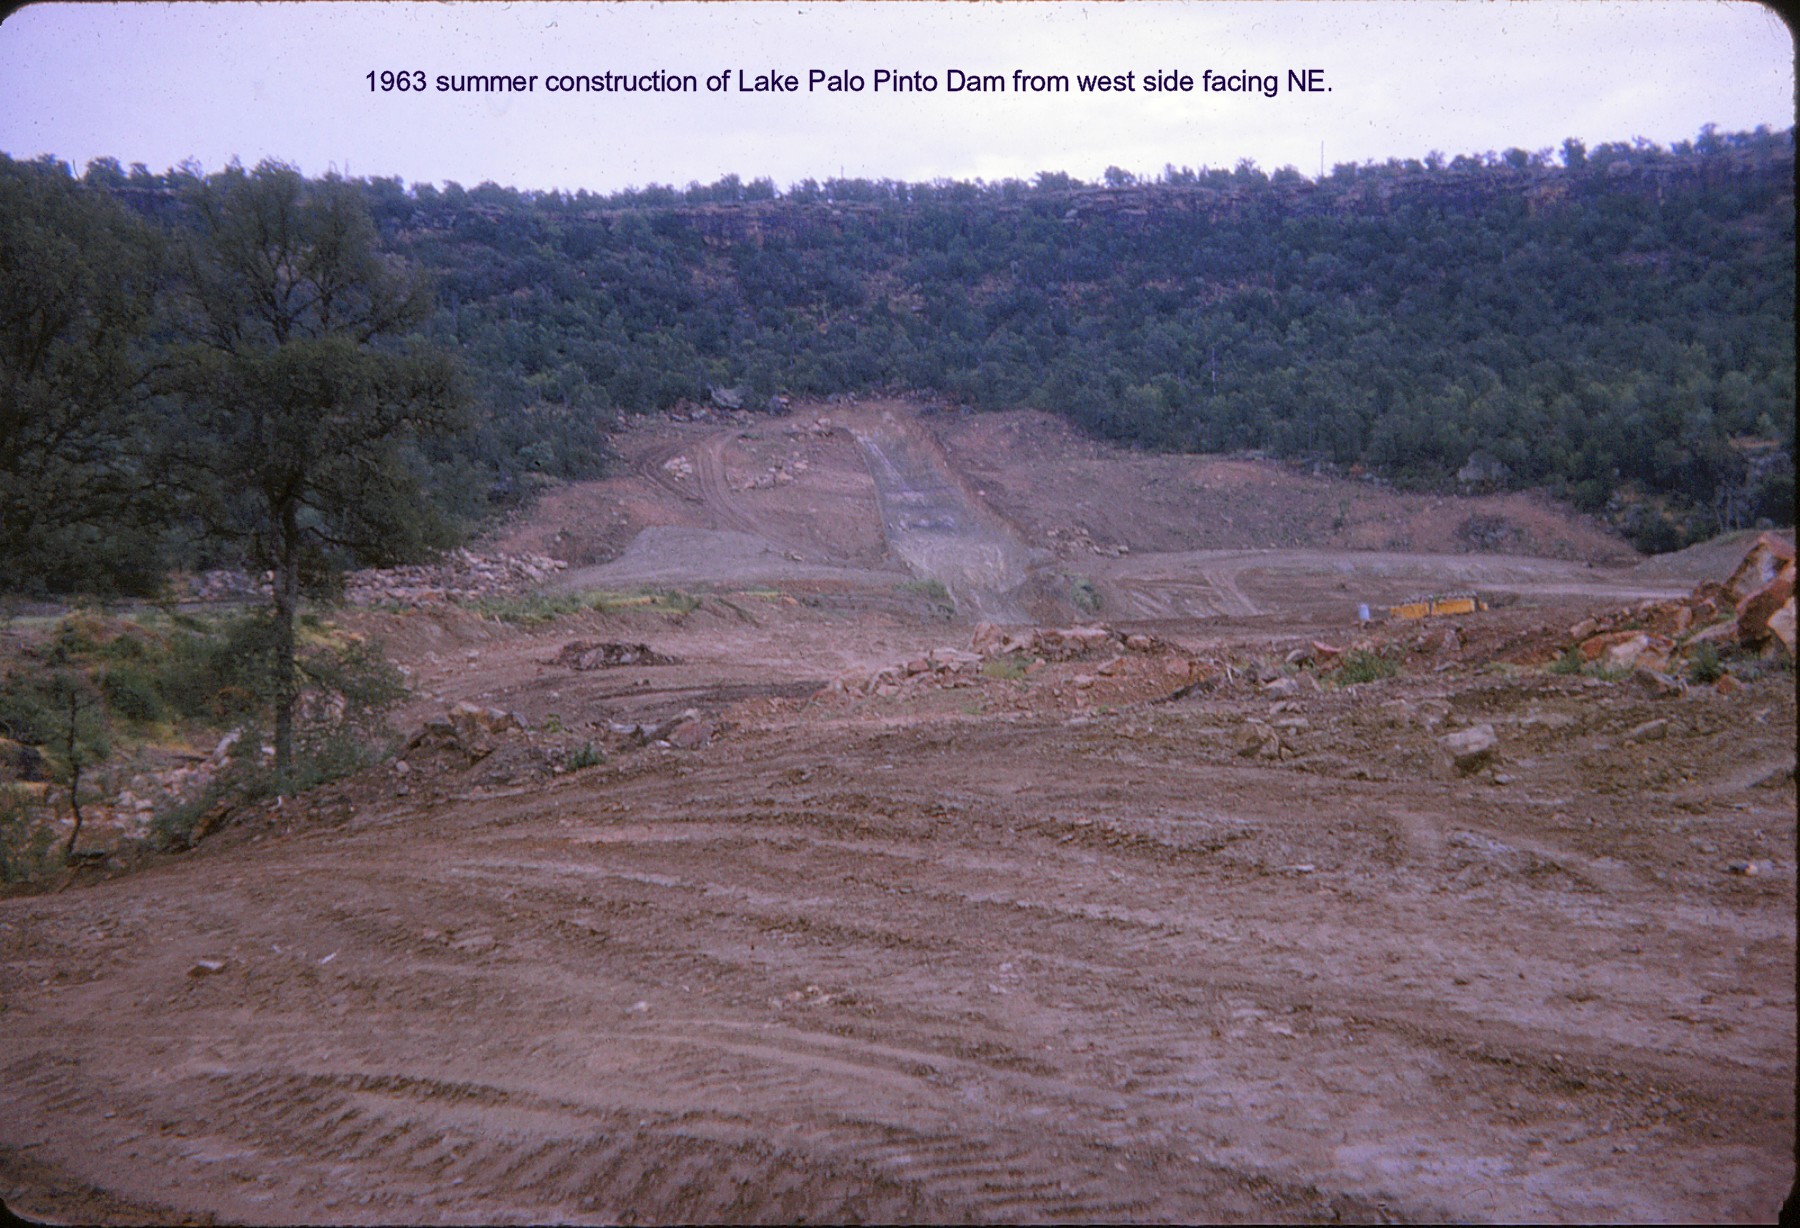 Construction of Lake Palo Pinto in summer of 1963